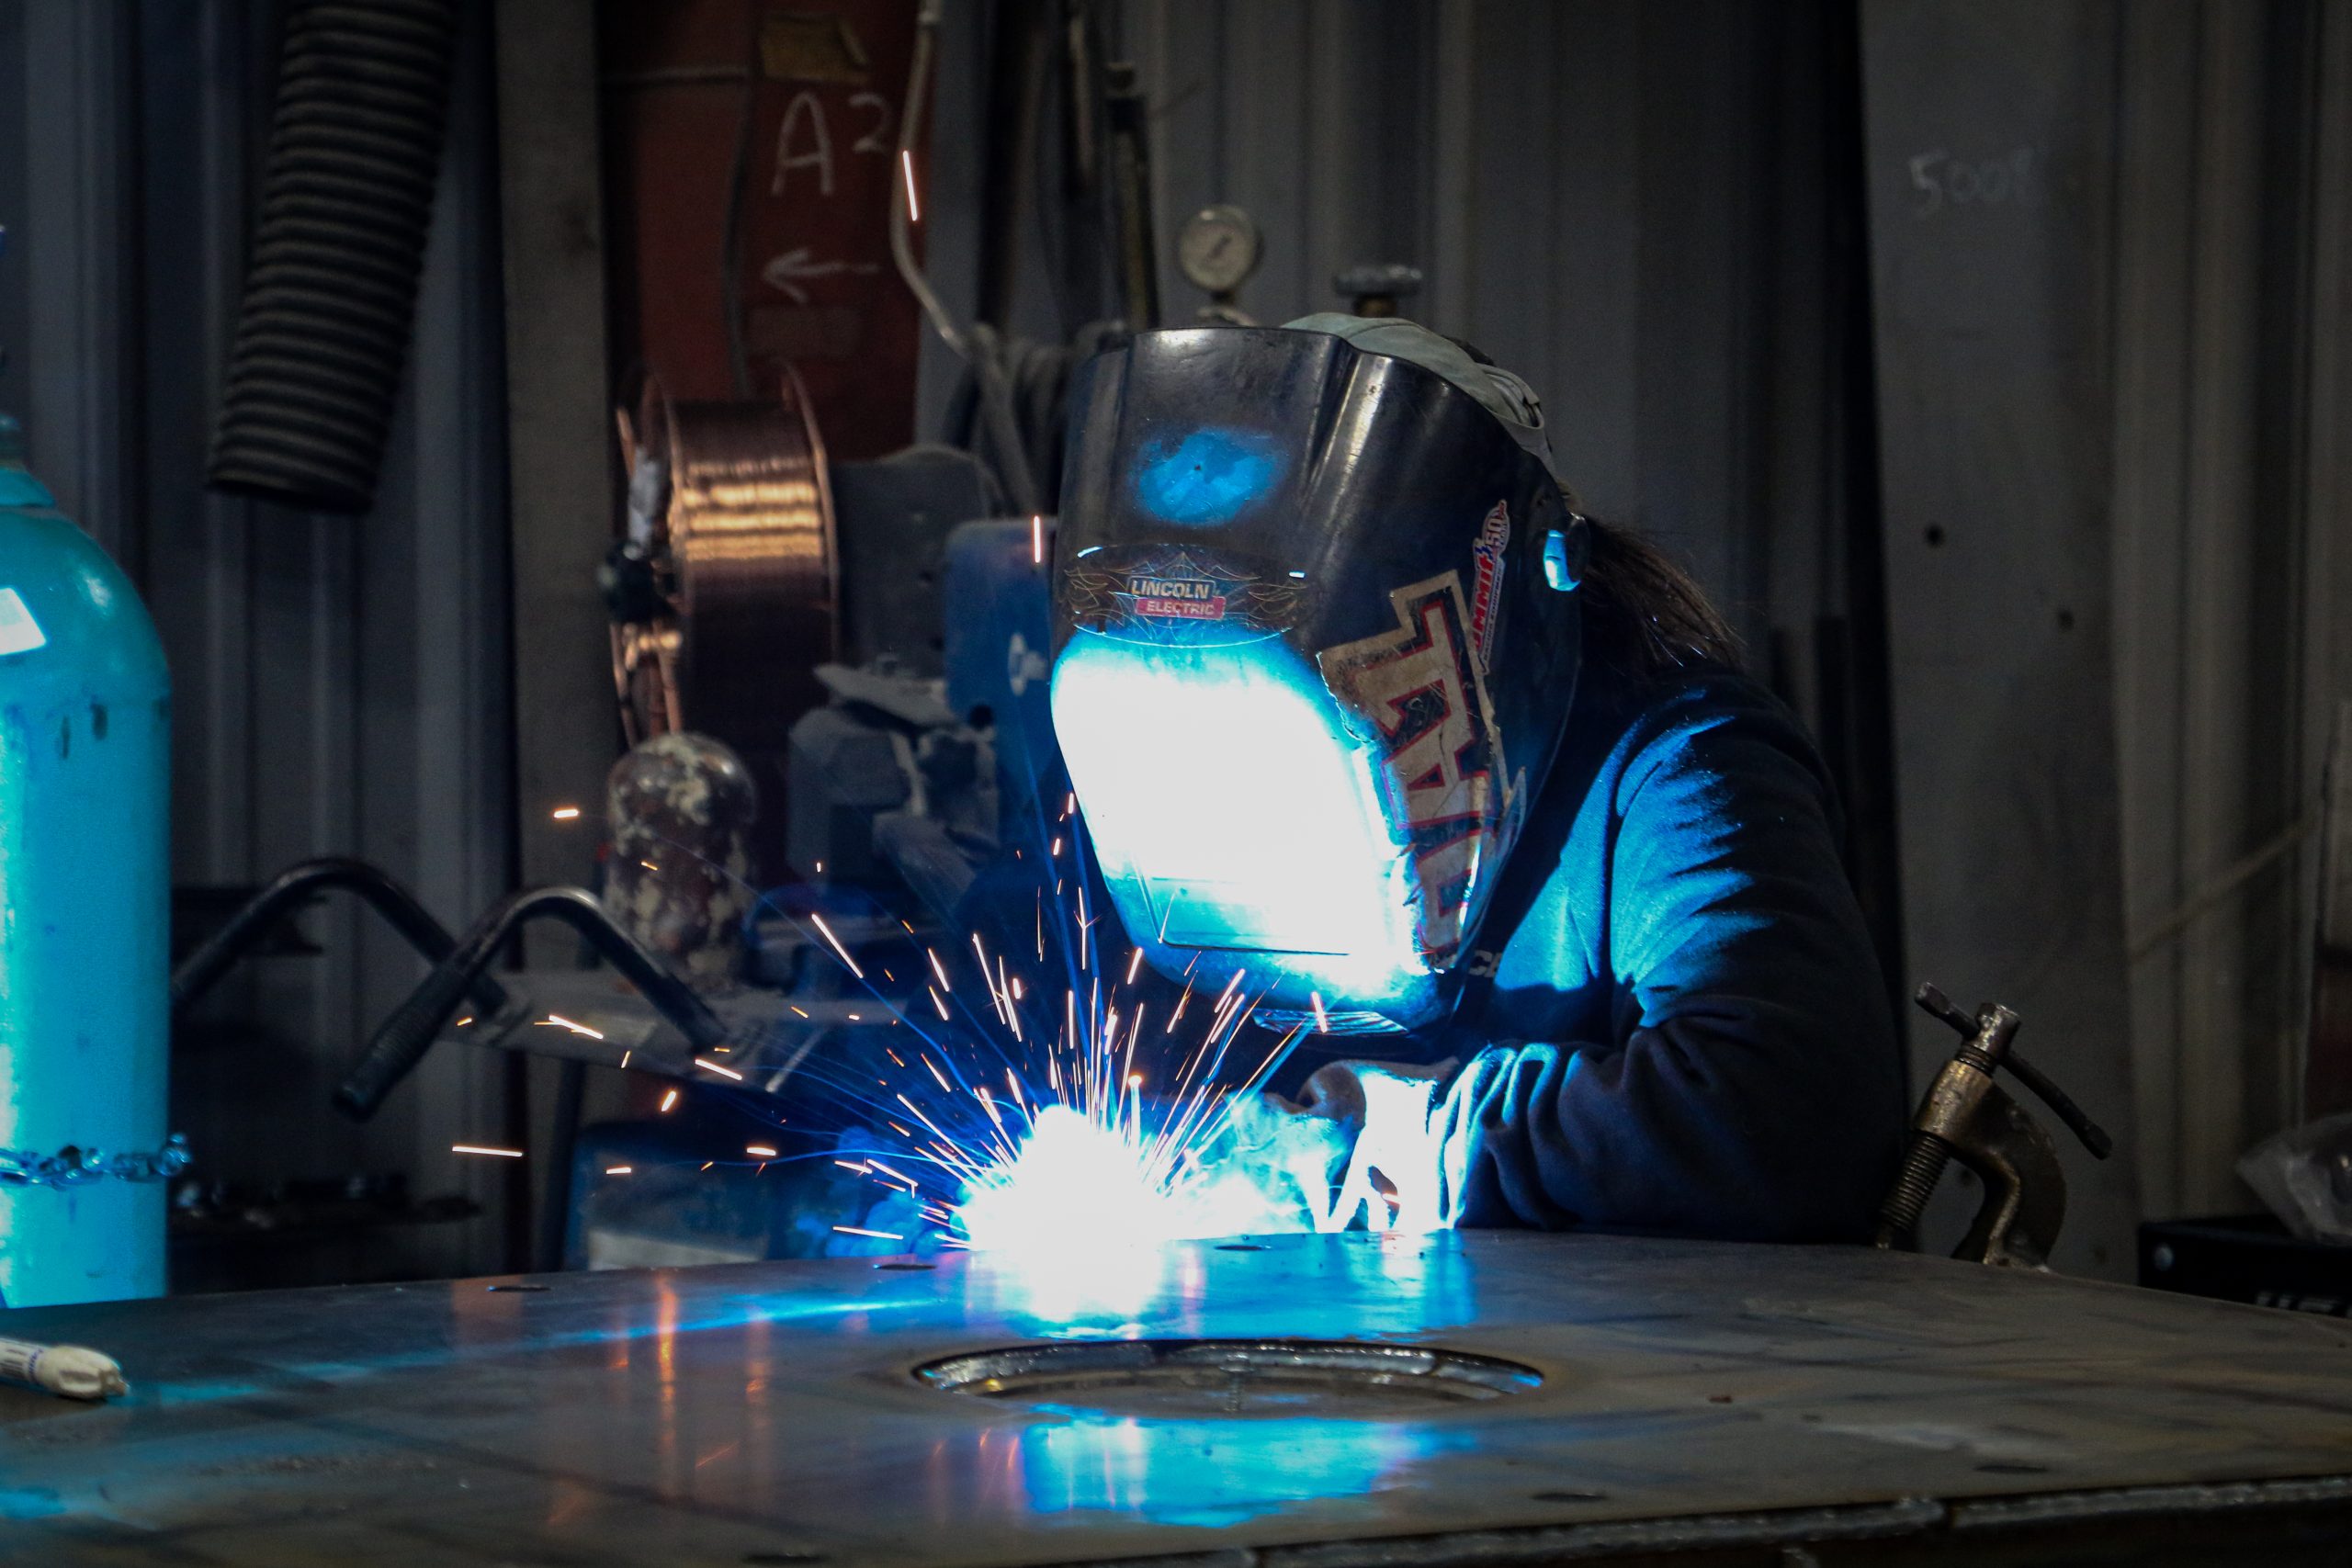 Welder Pamela Lewis works with KT Pacer's sub-assembly/small parts weldment team.